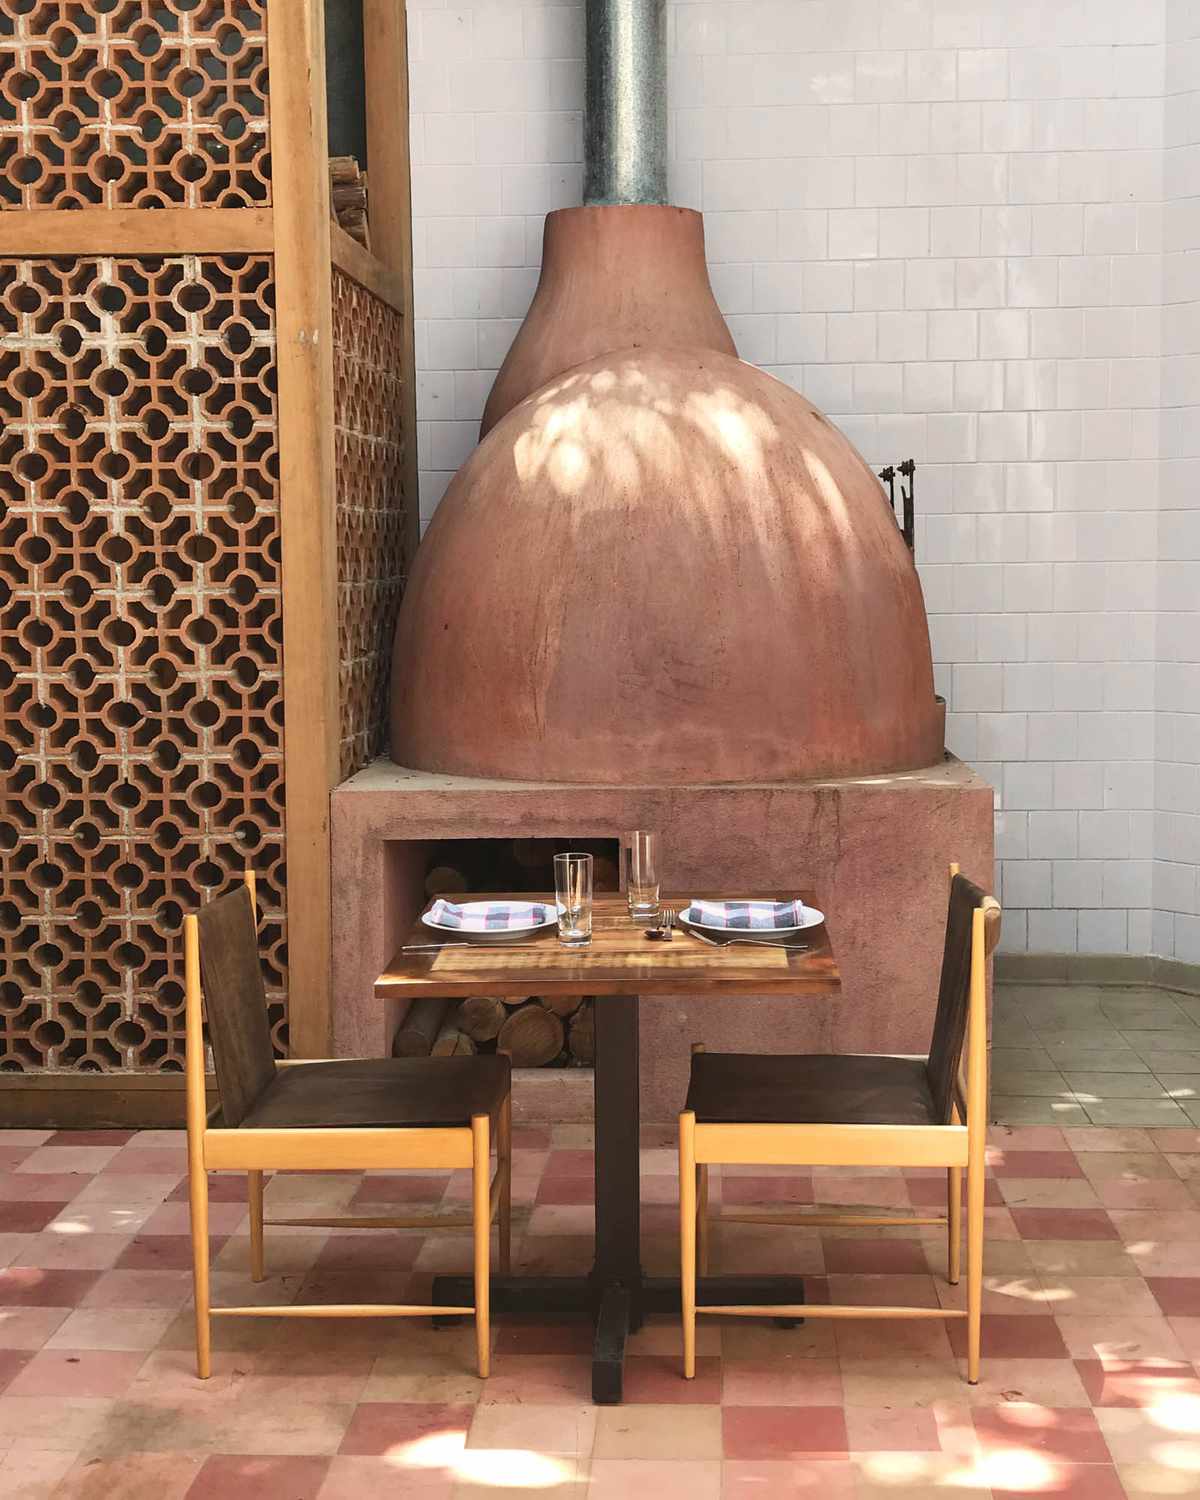 At Sud in Rio de Janeiro, a wood-fired oven informs a rustic menu in a small, cozy dining room.